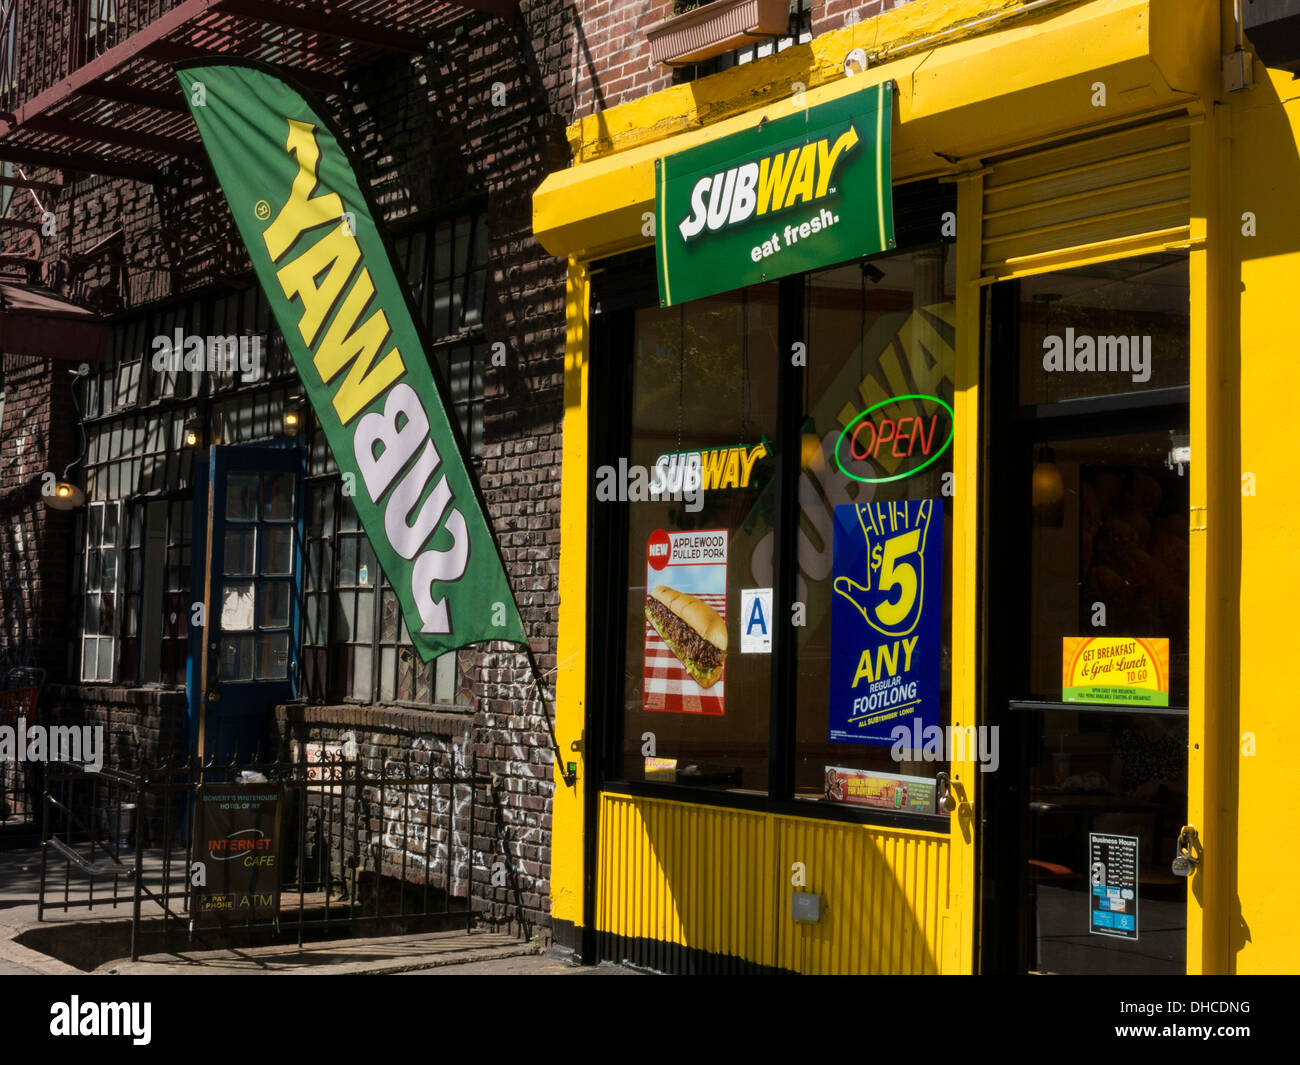 Subway Fast Food Restaurant Exterior and Advertising Banner, NYC Stock Photo